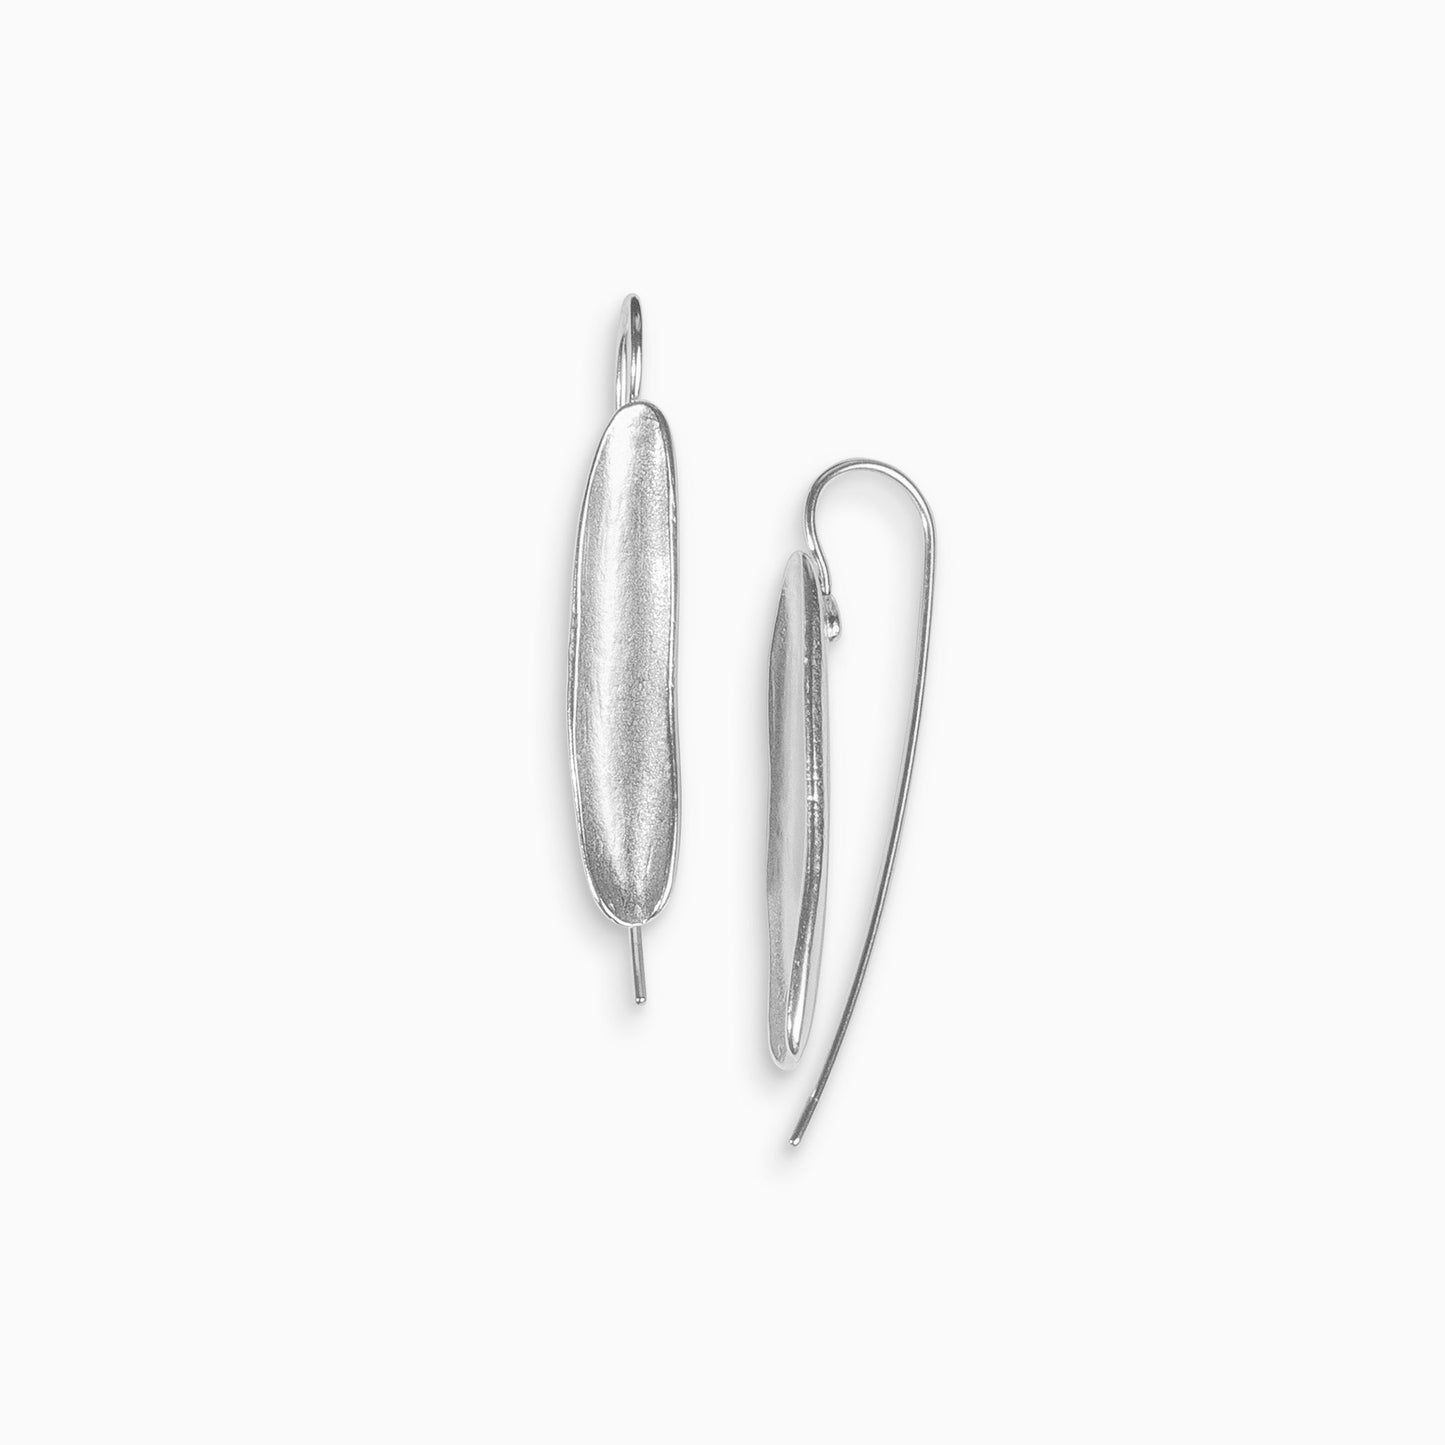 A pair of Recycled silver concave long oval shaped earrings with a hook fastening. Satin finish. 35mm length, 6mm width